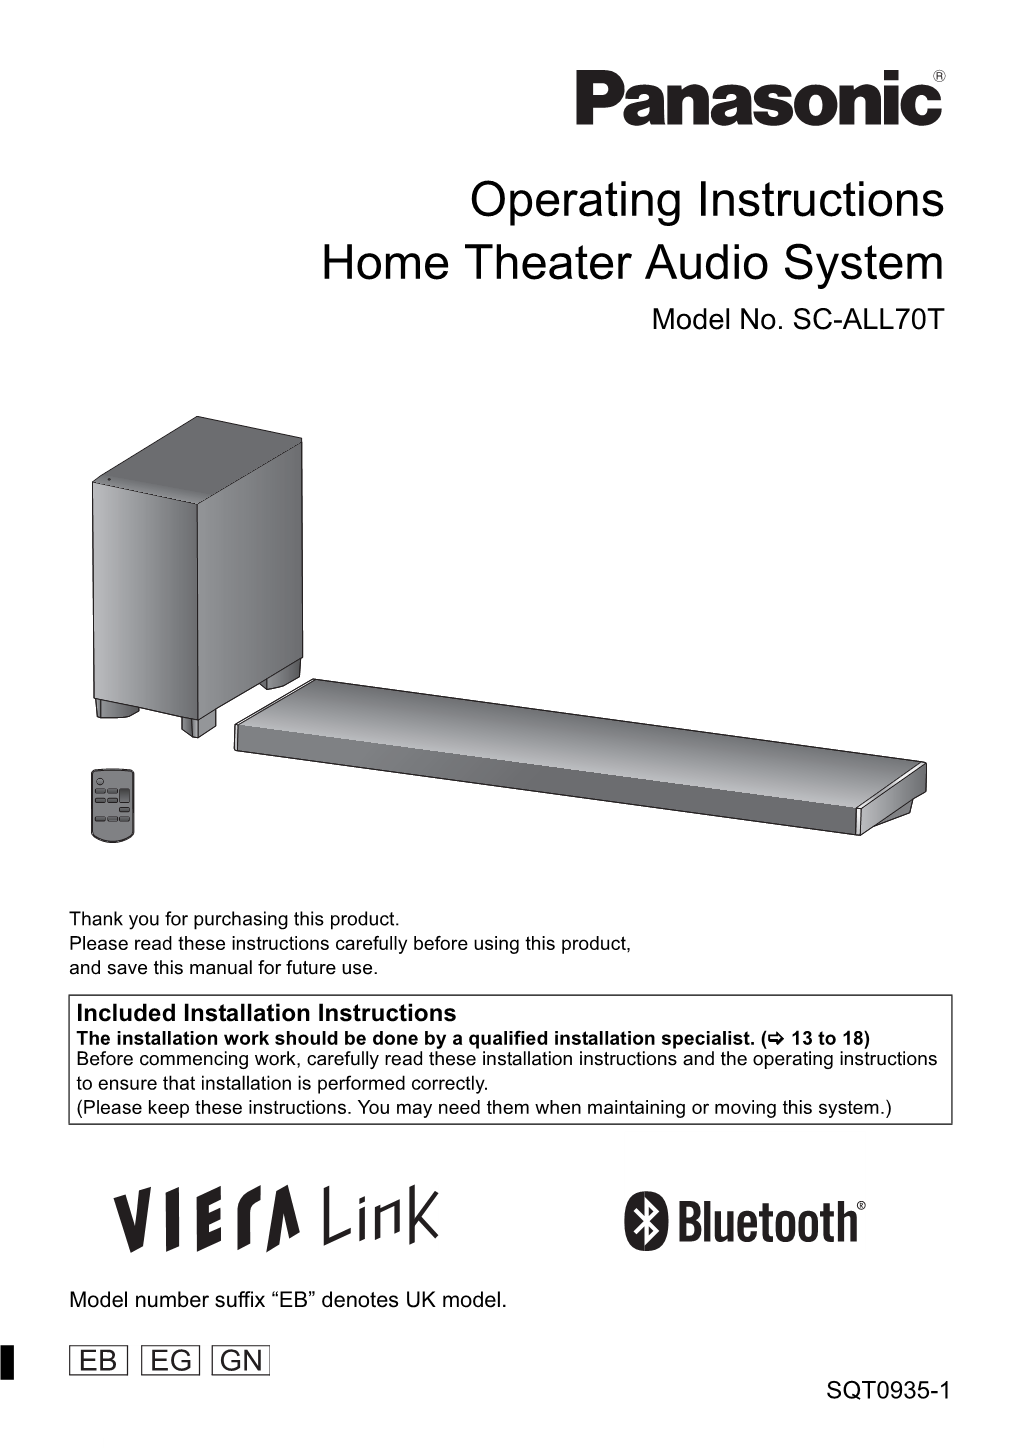 Operating Instructions Home Theater Audio System Model No